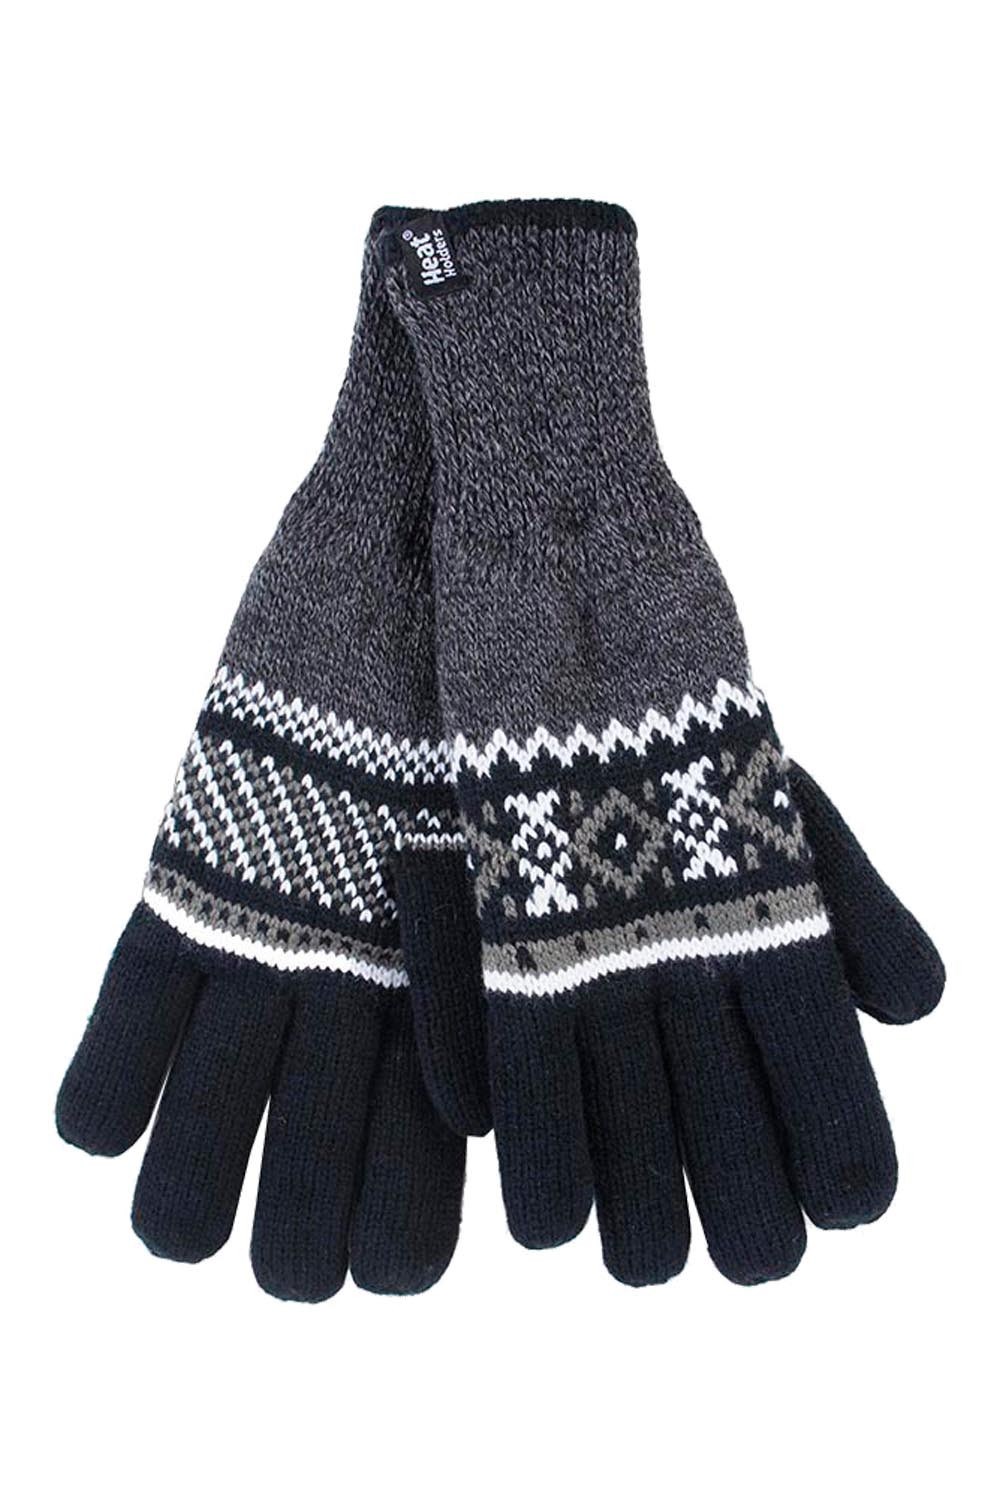 Mens Nordic Fleece Lined Thermal Gloves -